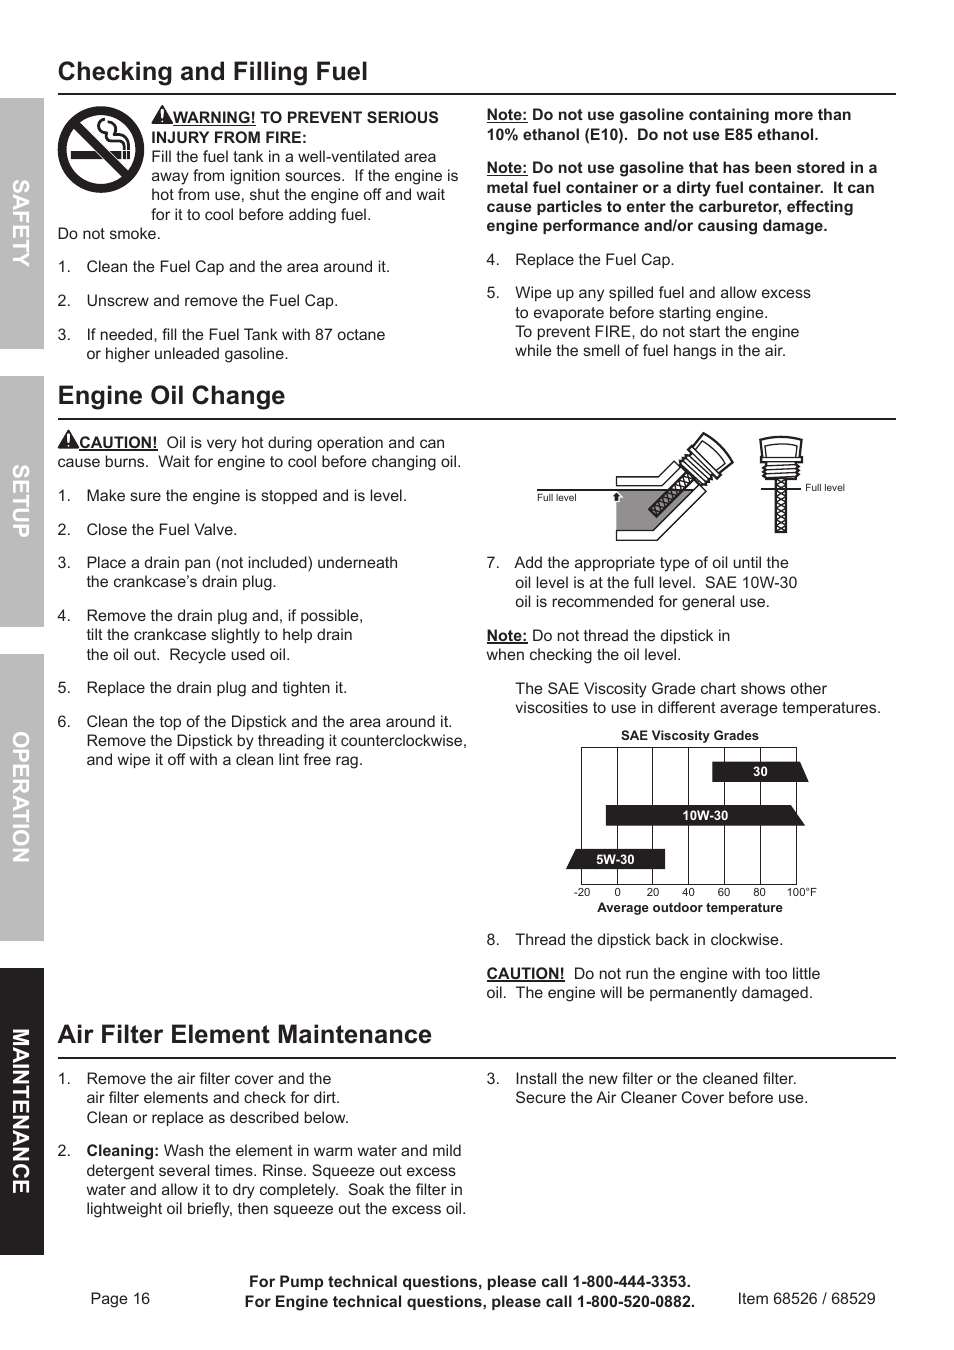 Checking and filling fuel, Engine oil change, Air filter element maintenance | Harbor Freight Tools Predator 6500 Watt Portable Generator 68526 User Manual | Page 16 / 24